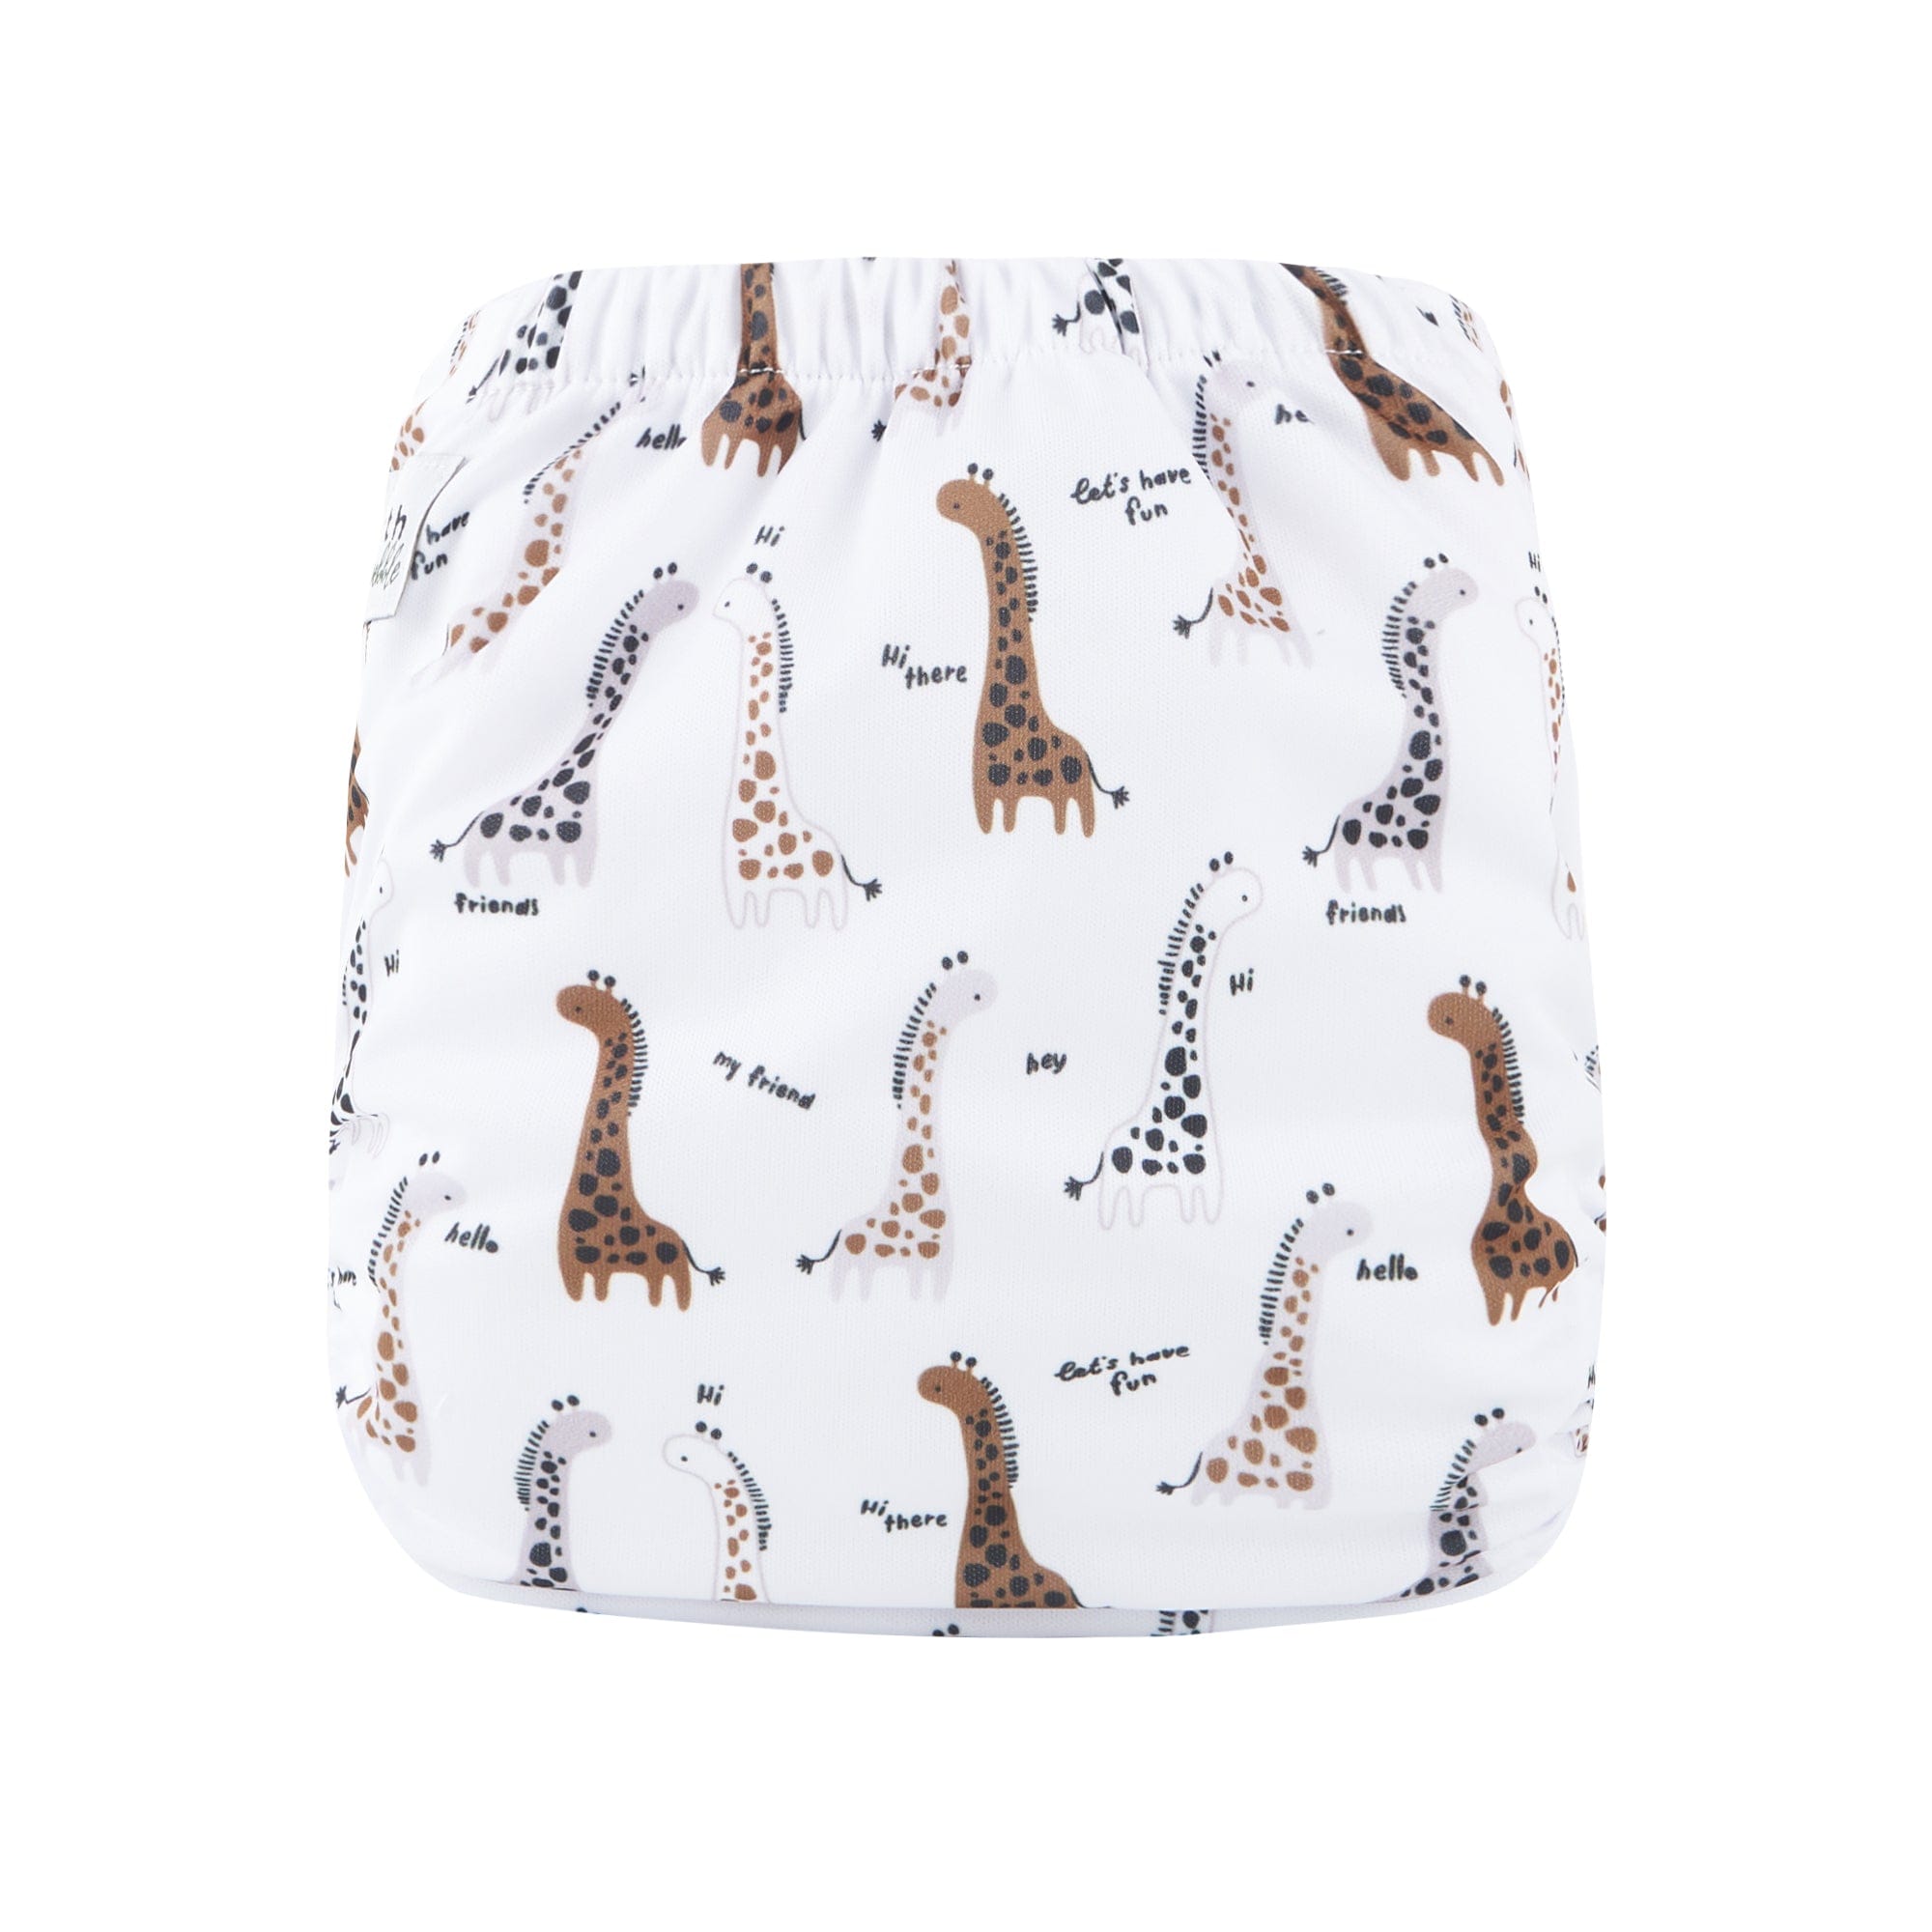 Earth & Pebble One Size Pocket Diaper - Into The Wild Collection